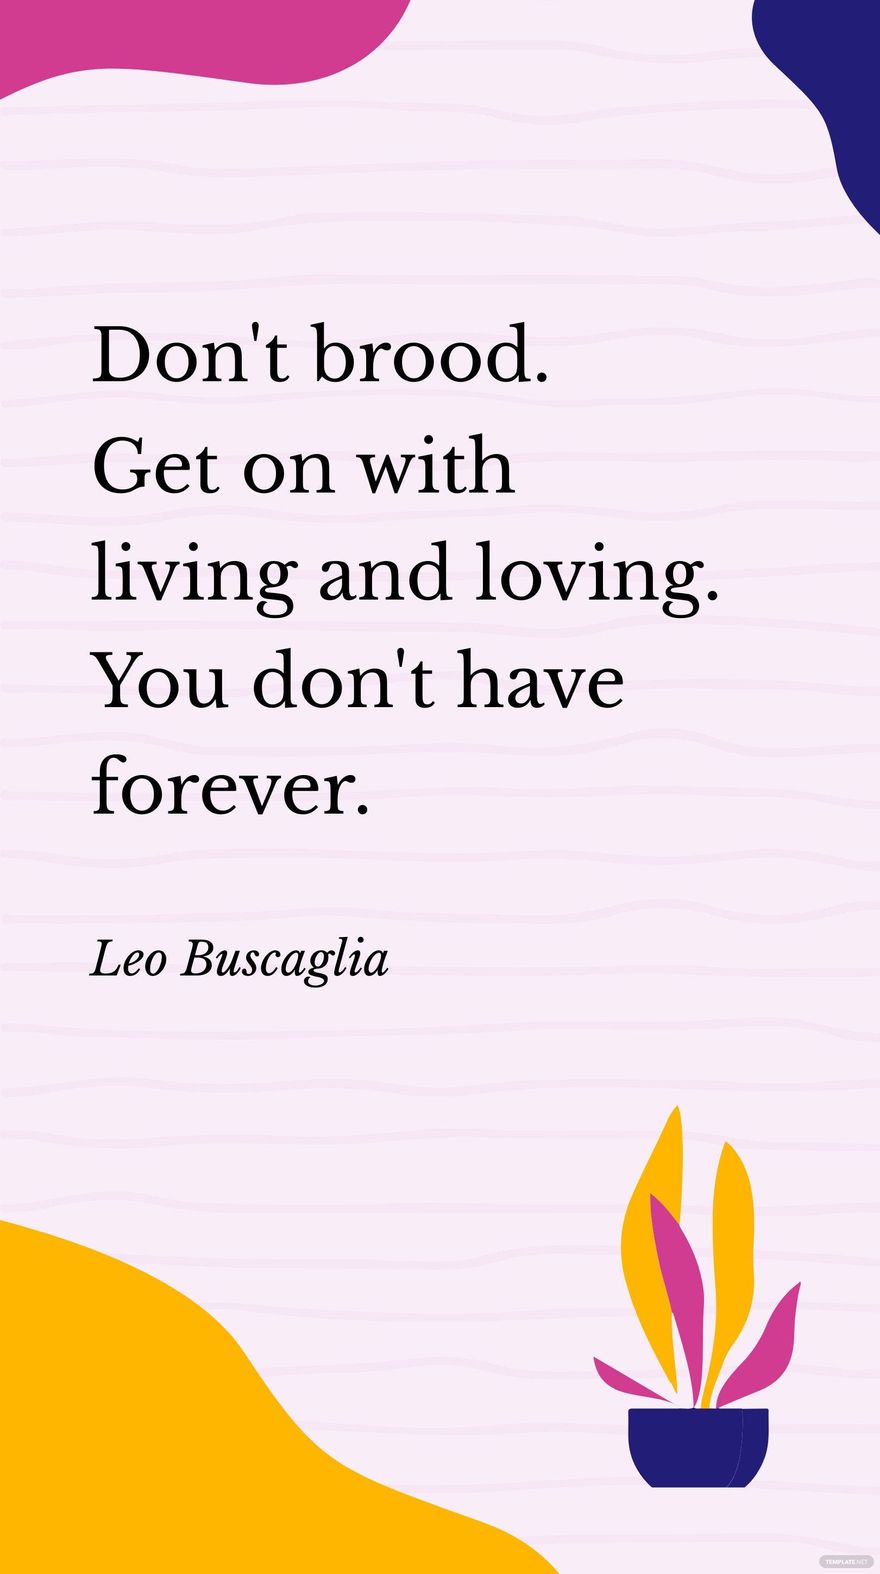 Free Leo Buscaglia - Don't brood. Get on with living and loving. You don't have forever. in JPG